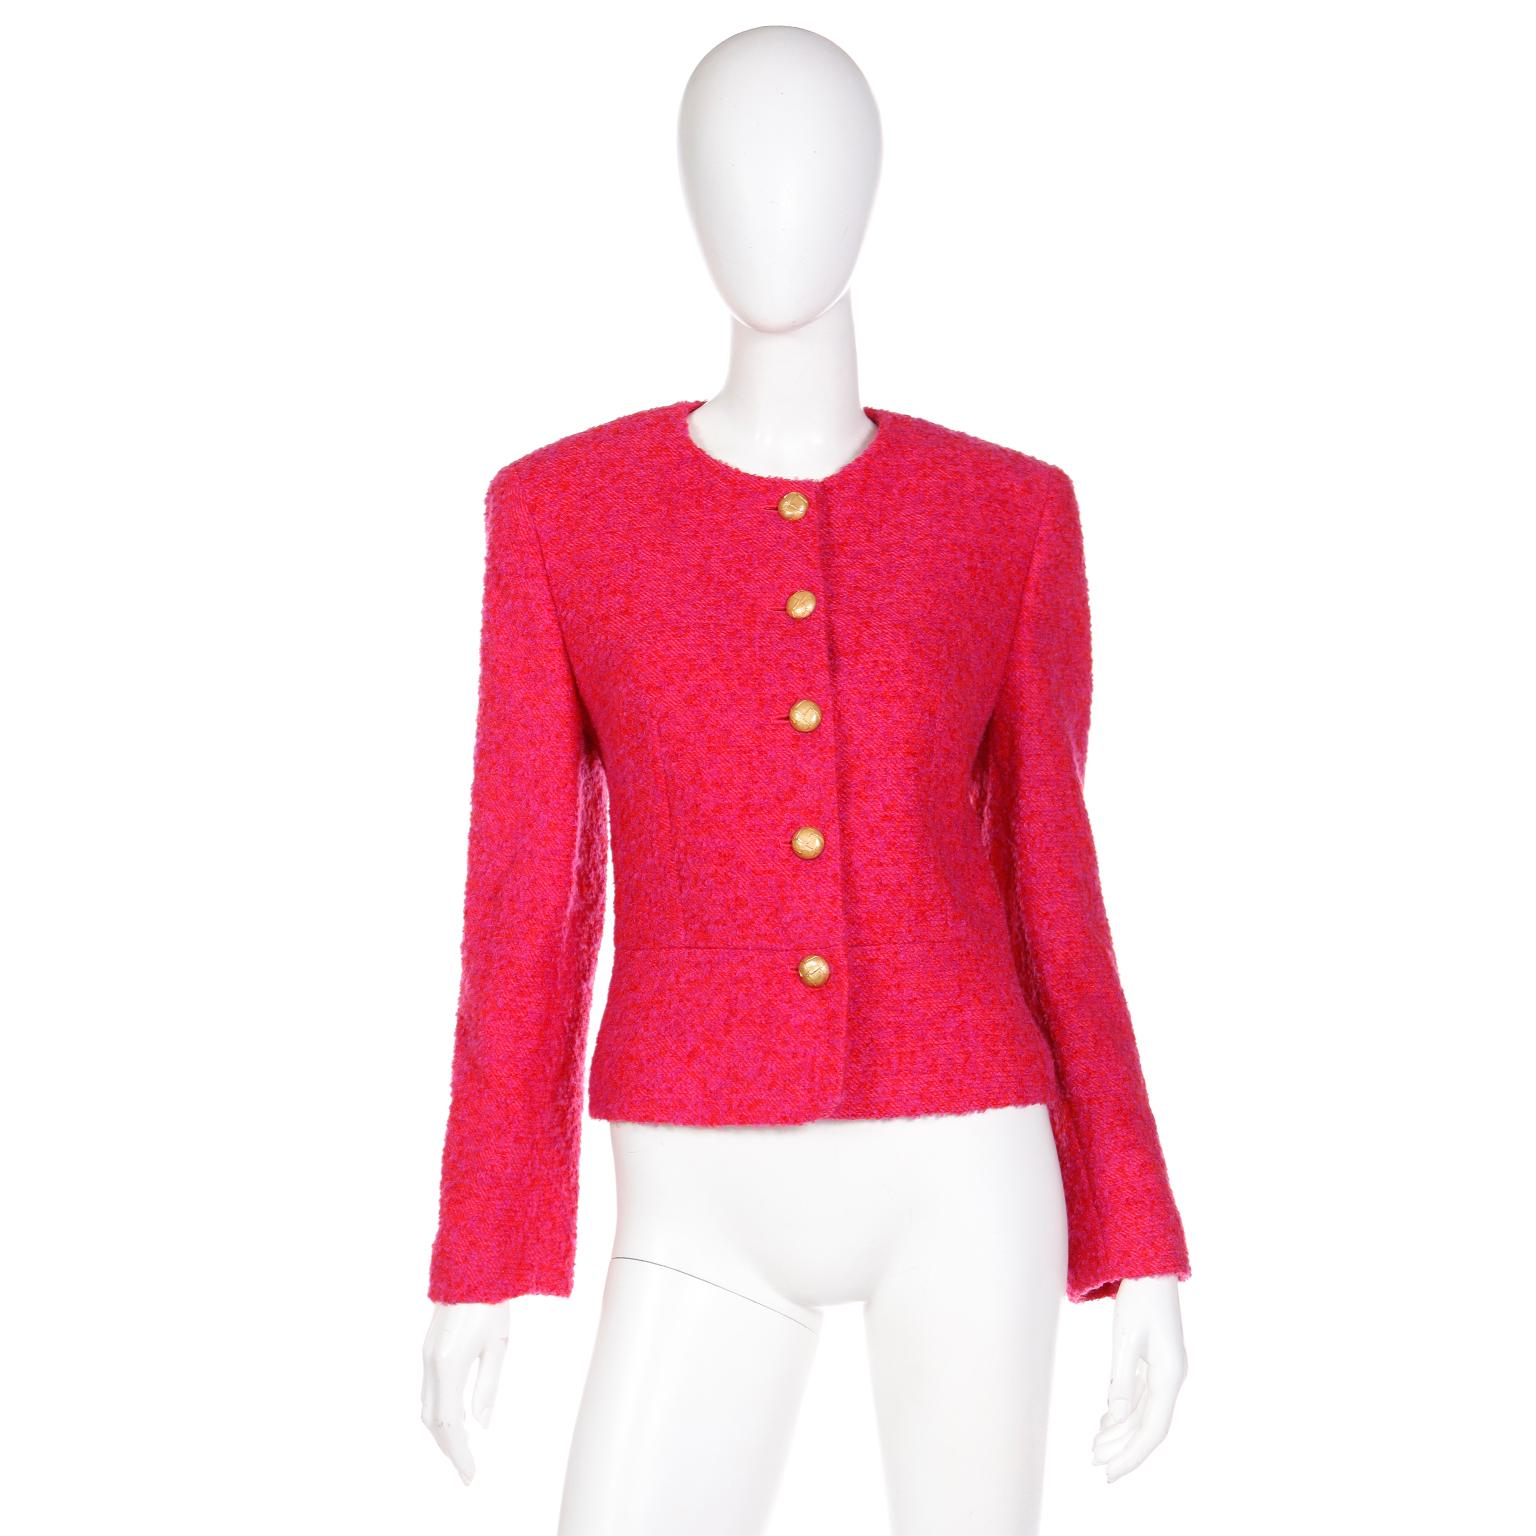 This fabulous vintage Louis Feraud cropped jacket is in a raspberry pink / red and purple boucle mohair wool blend. This round neck, collarless jacket has textured gold buttons down the center front and at the cuffs of the sleeves. The jacket is